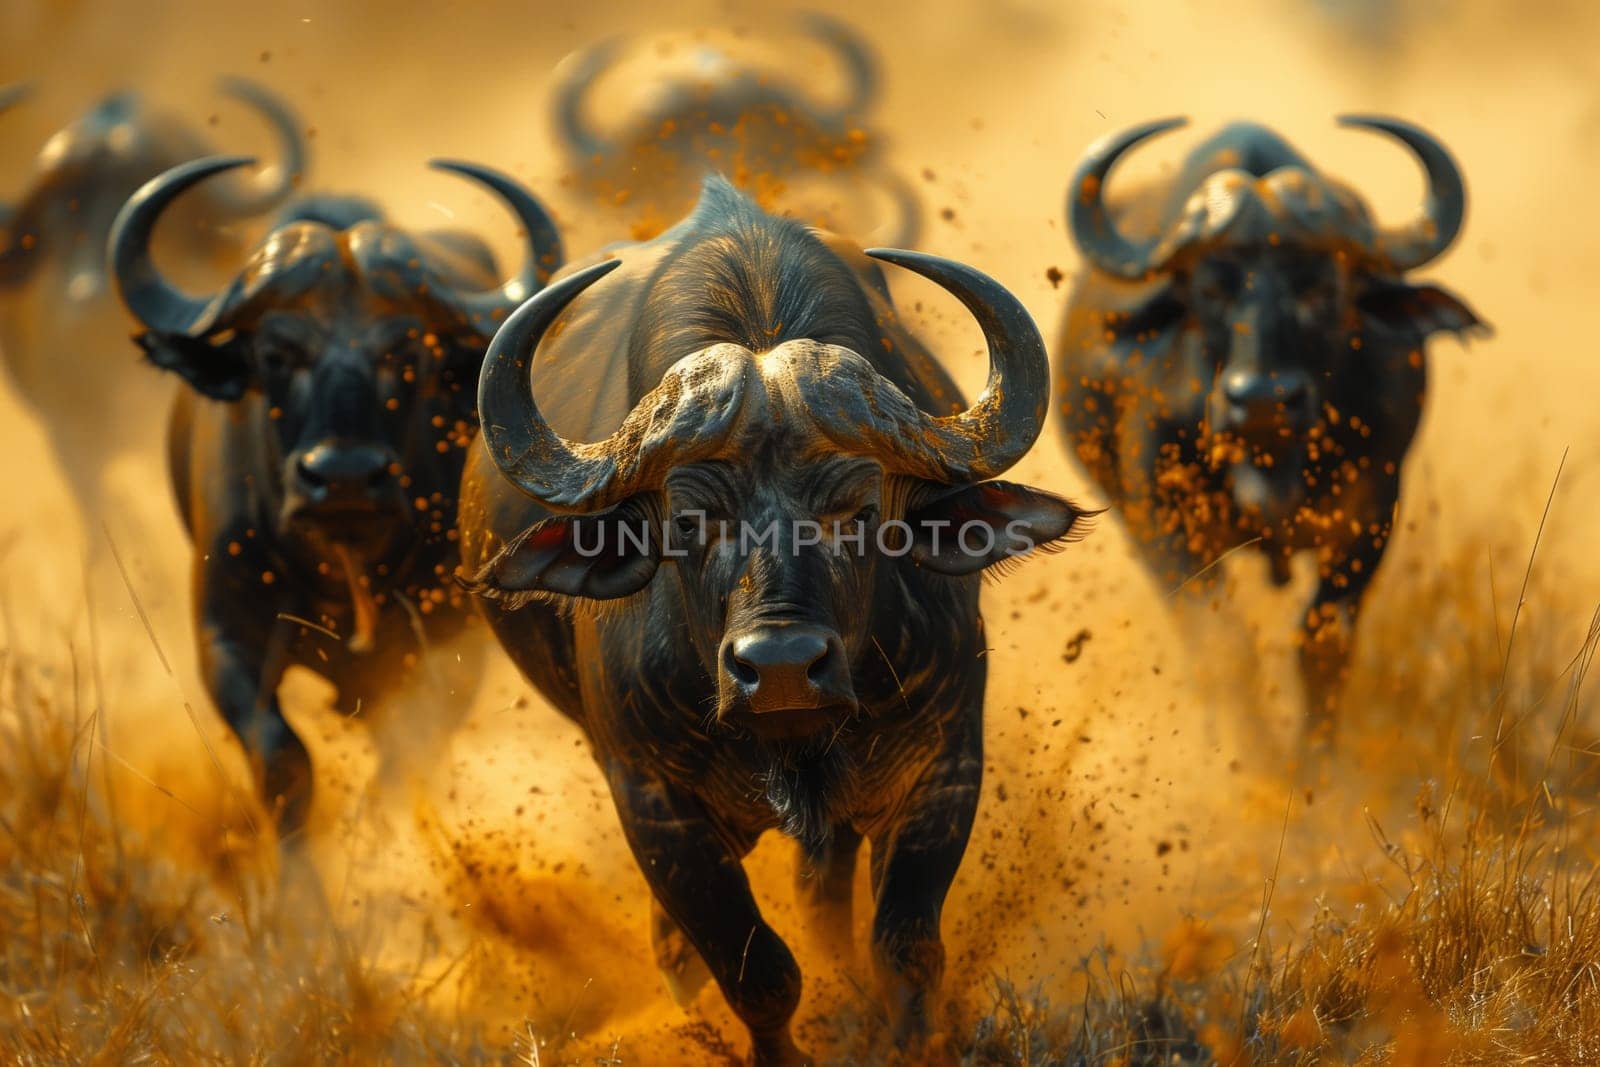 Herd of buffalo running in natural field landscape by richwolf